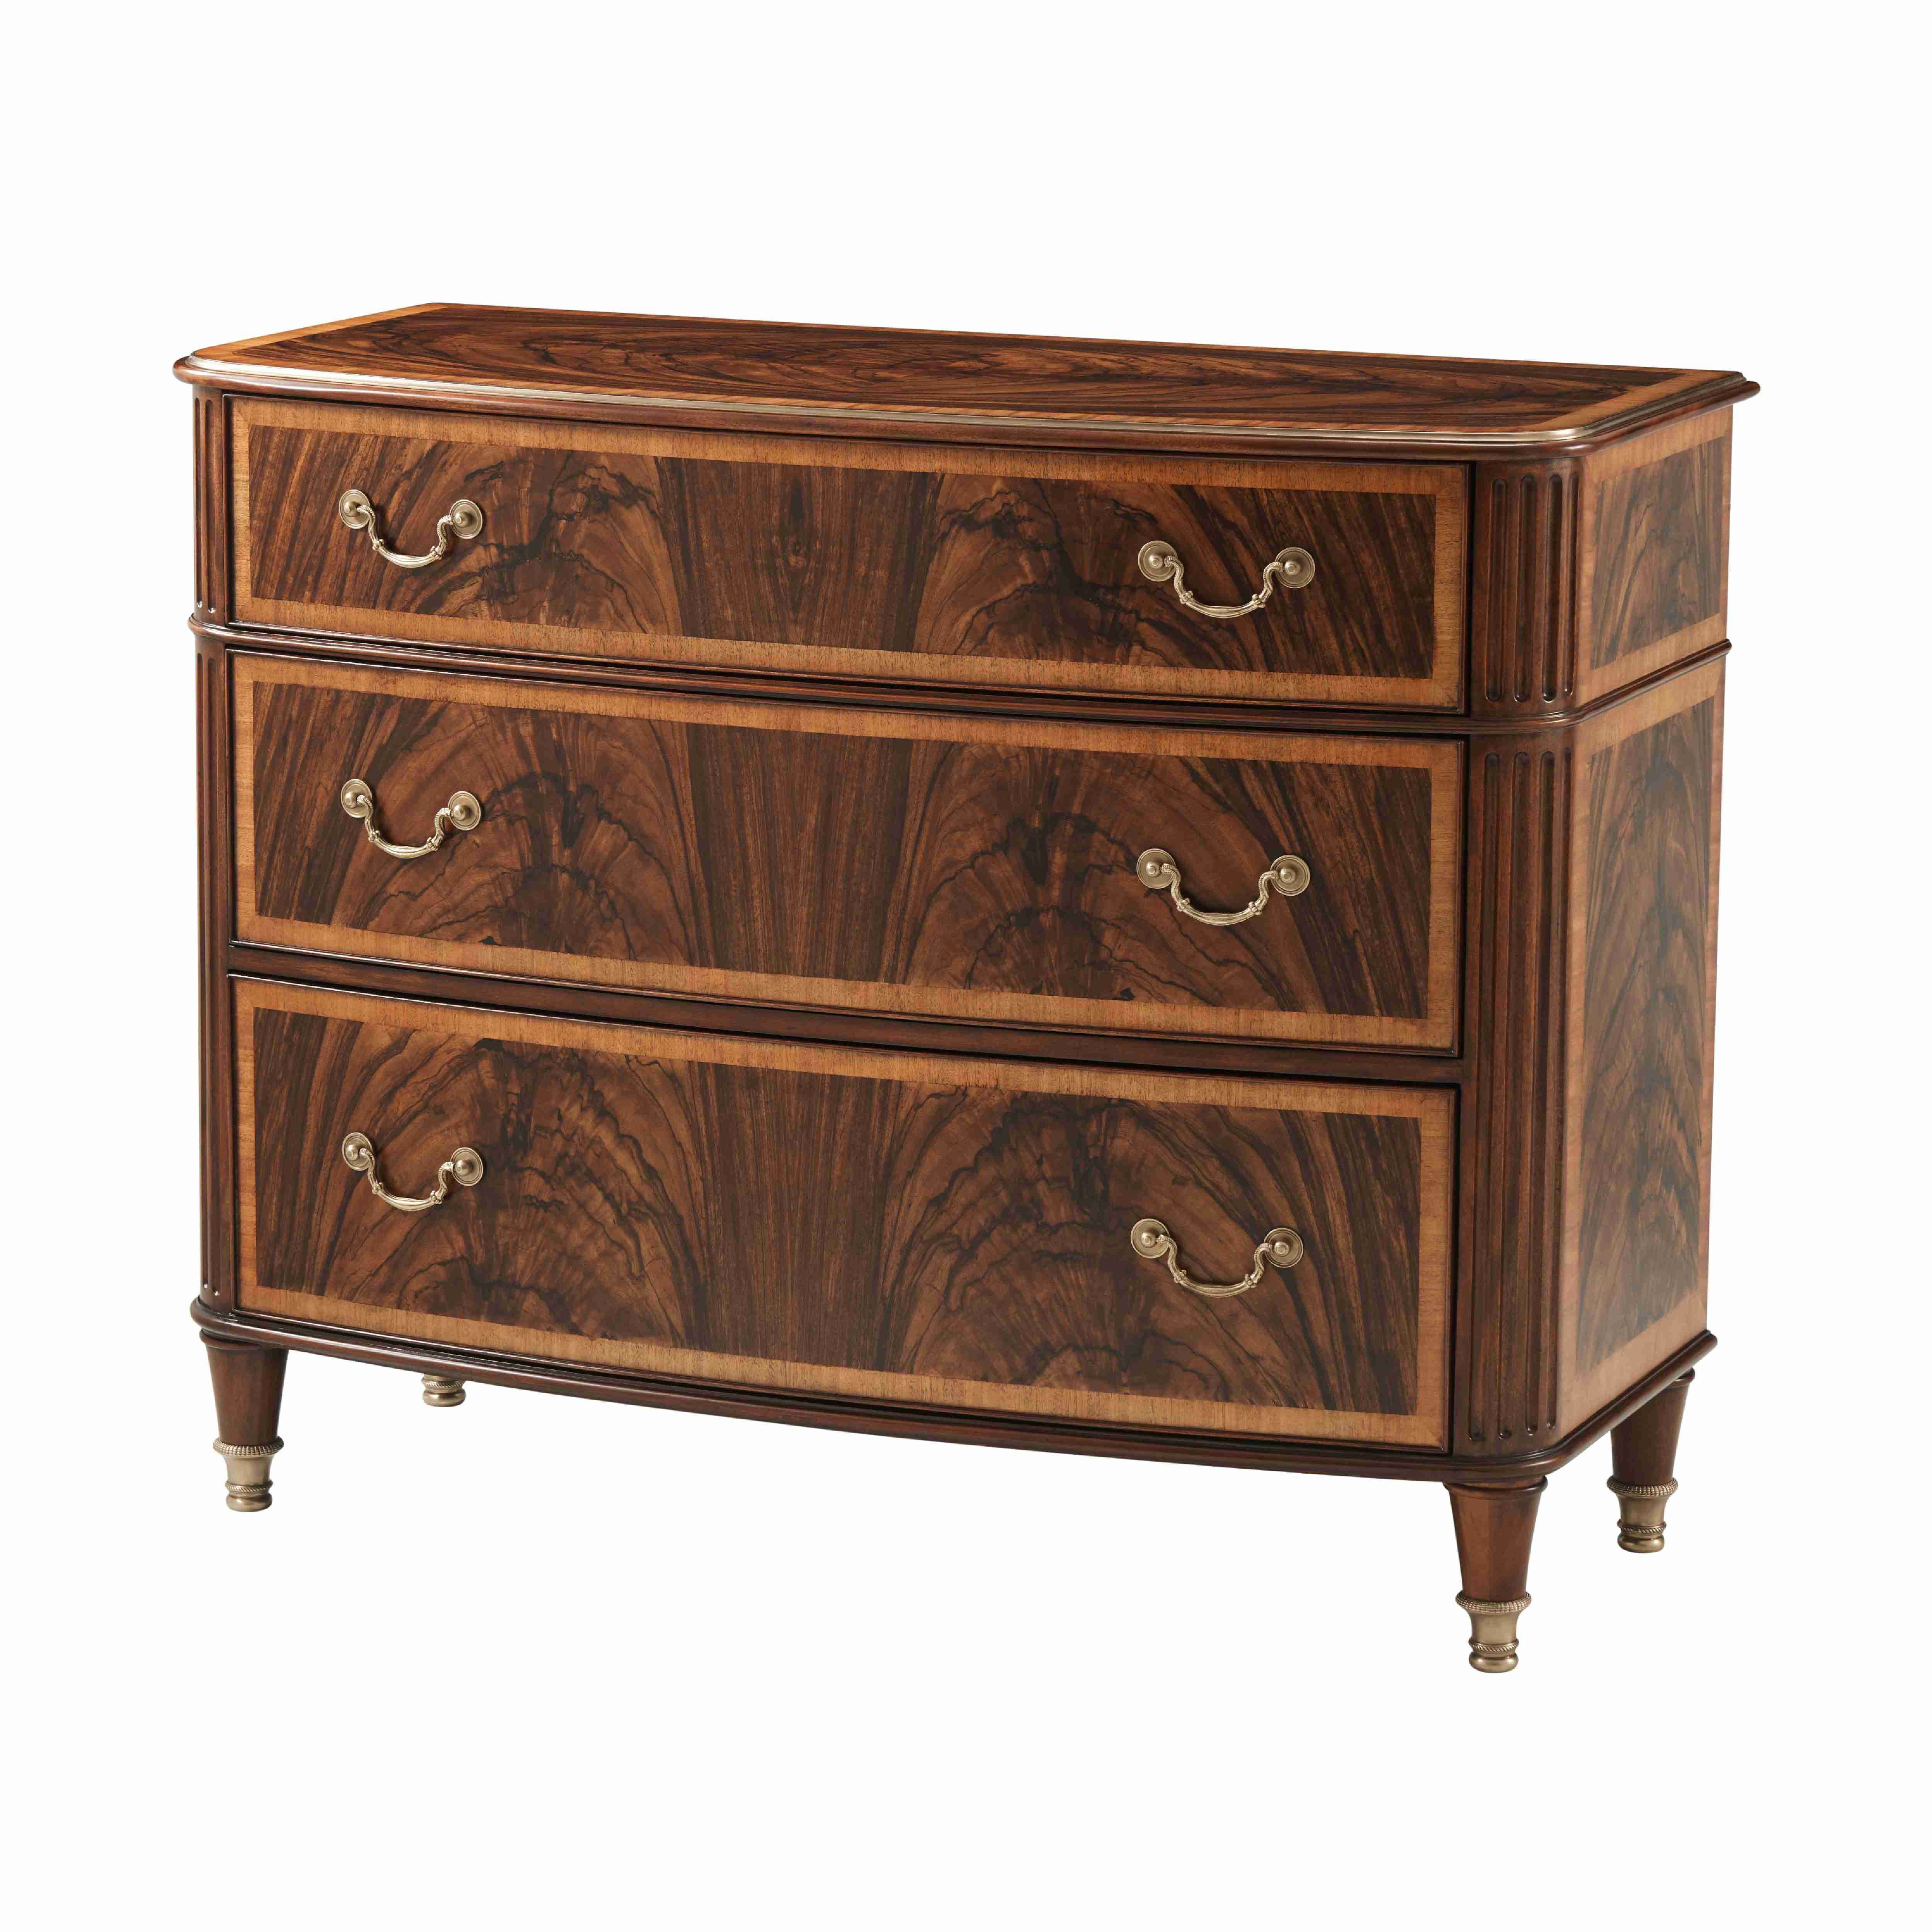 ANTE CHEST OF DRAWERS